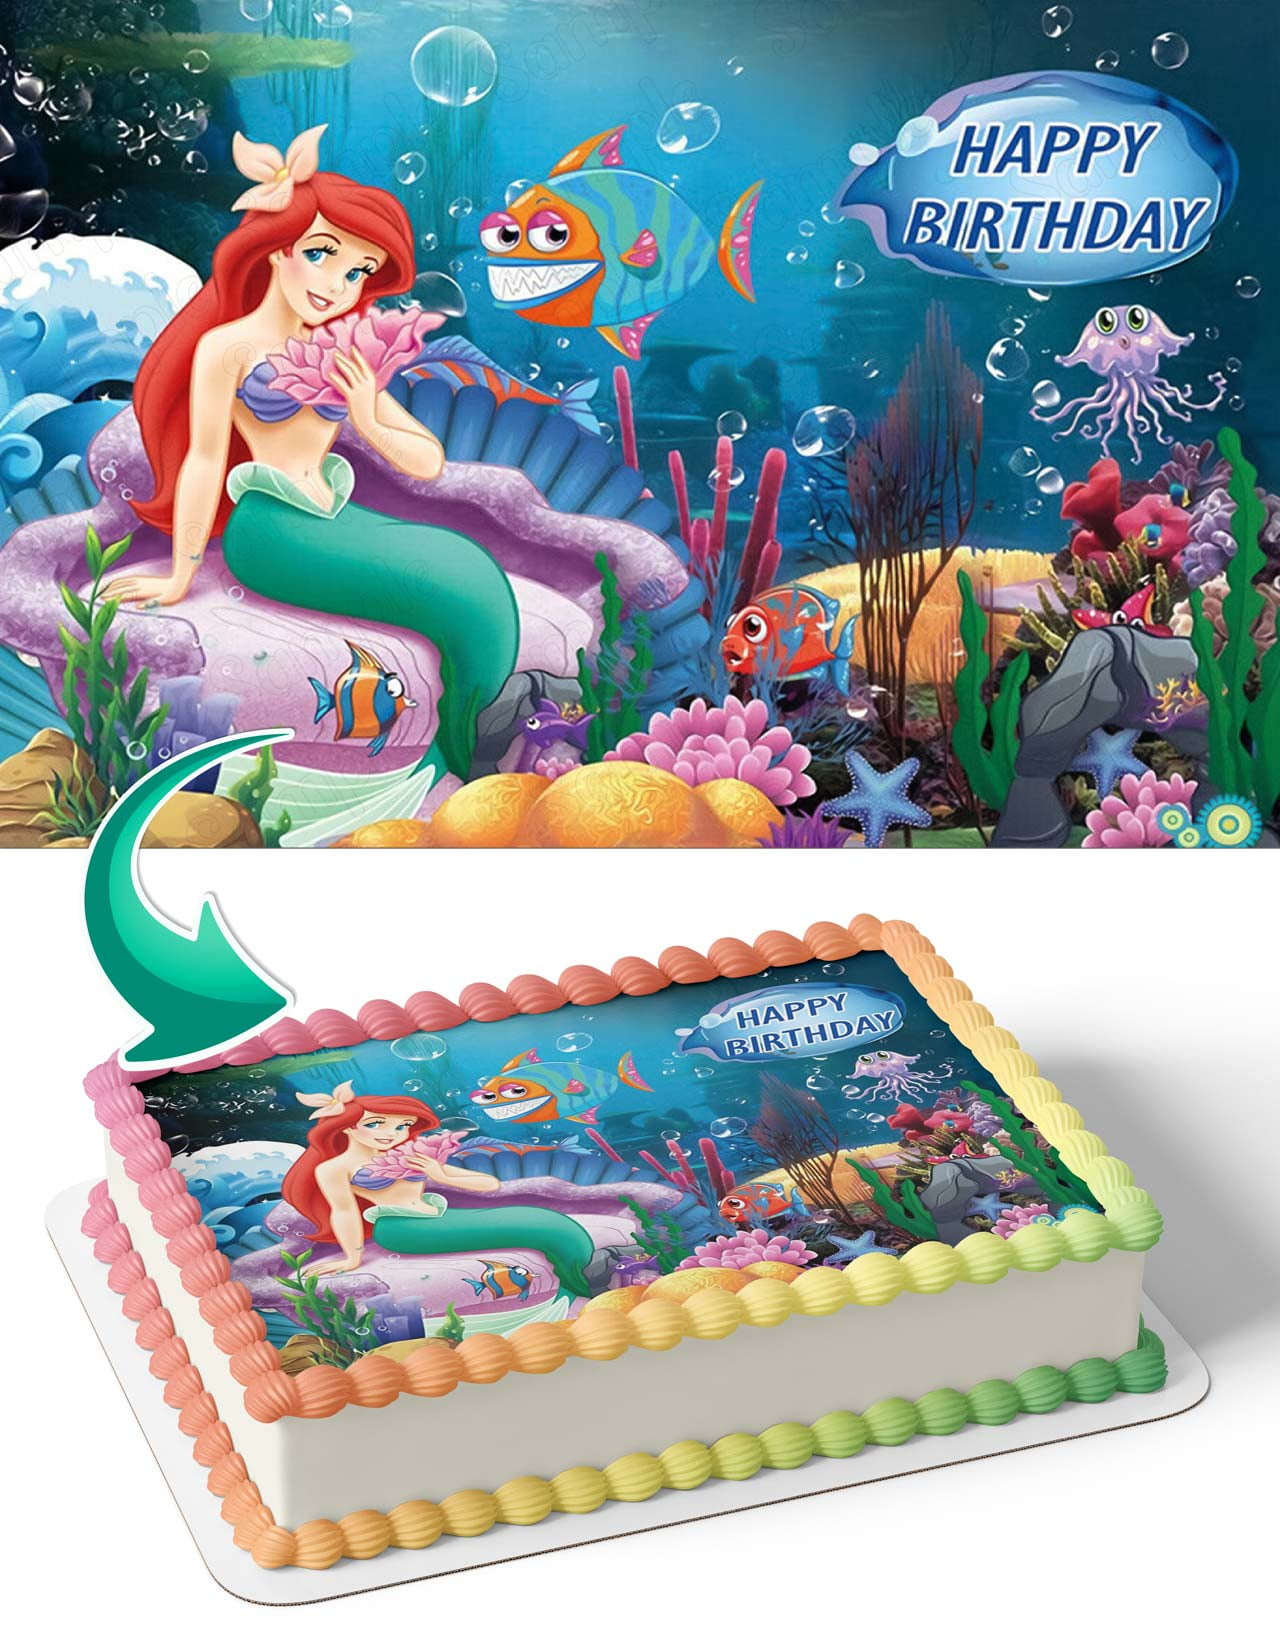 For Goodness Cake - Mermaids! Cake 1: Ariel buttercream cake with fondant  accents of shells and coral. Serves: 25 Cake 2: Mermaid buttercream cake  with waves on the bottom tier and chocolate seashells Serves: 25 | Facebook